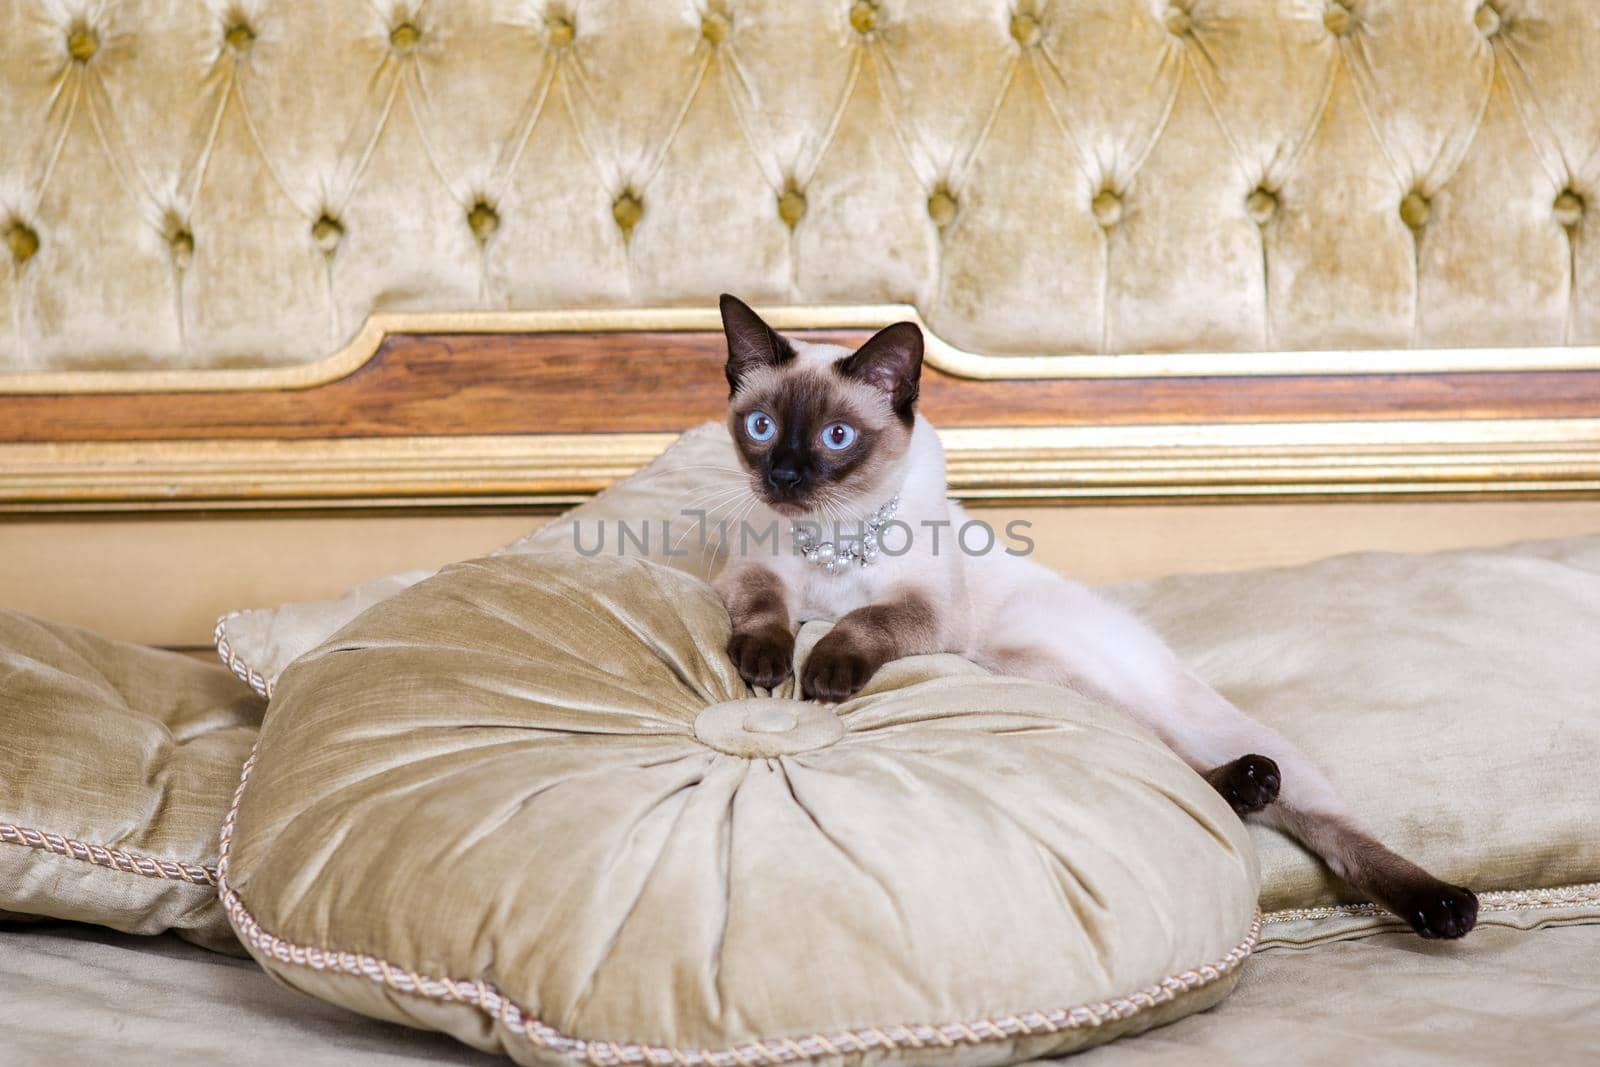 The theme is luxury and wealth. Young cat without a tail thoroughbred Mecogon bobtail lies resting on a big bed on a pillow in a Renaissance Baroque interior in France Europe Versailles Palace by Tomashevska